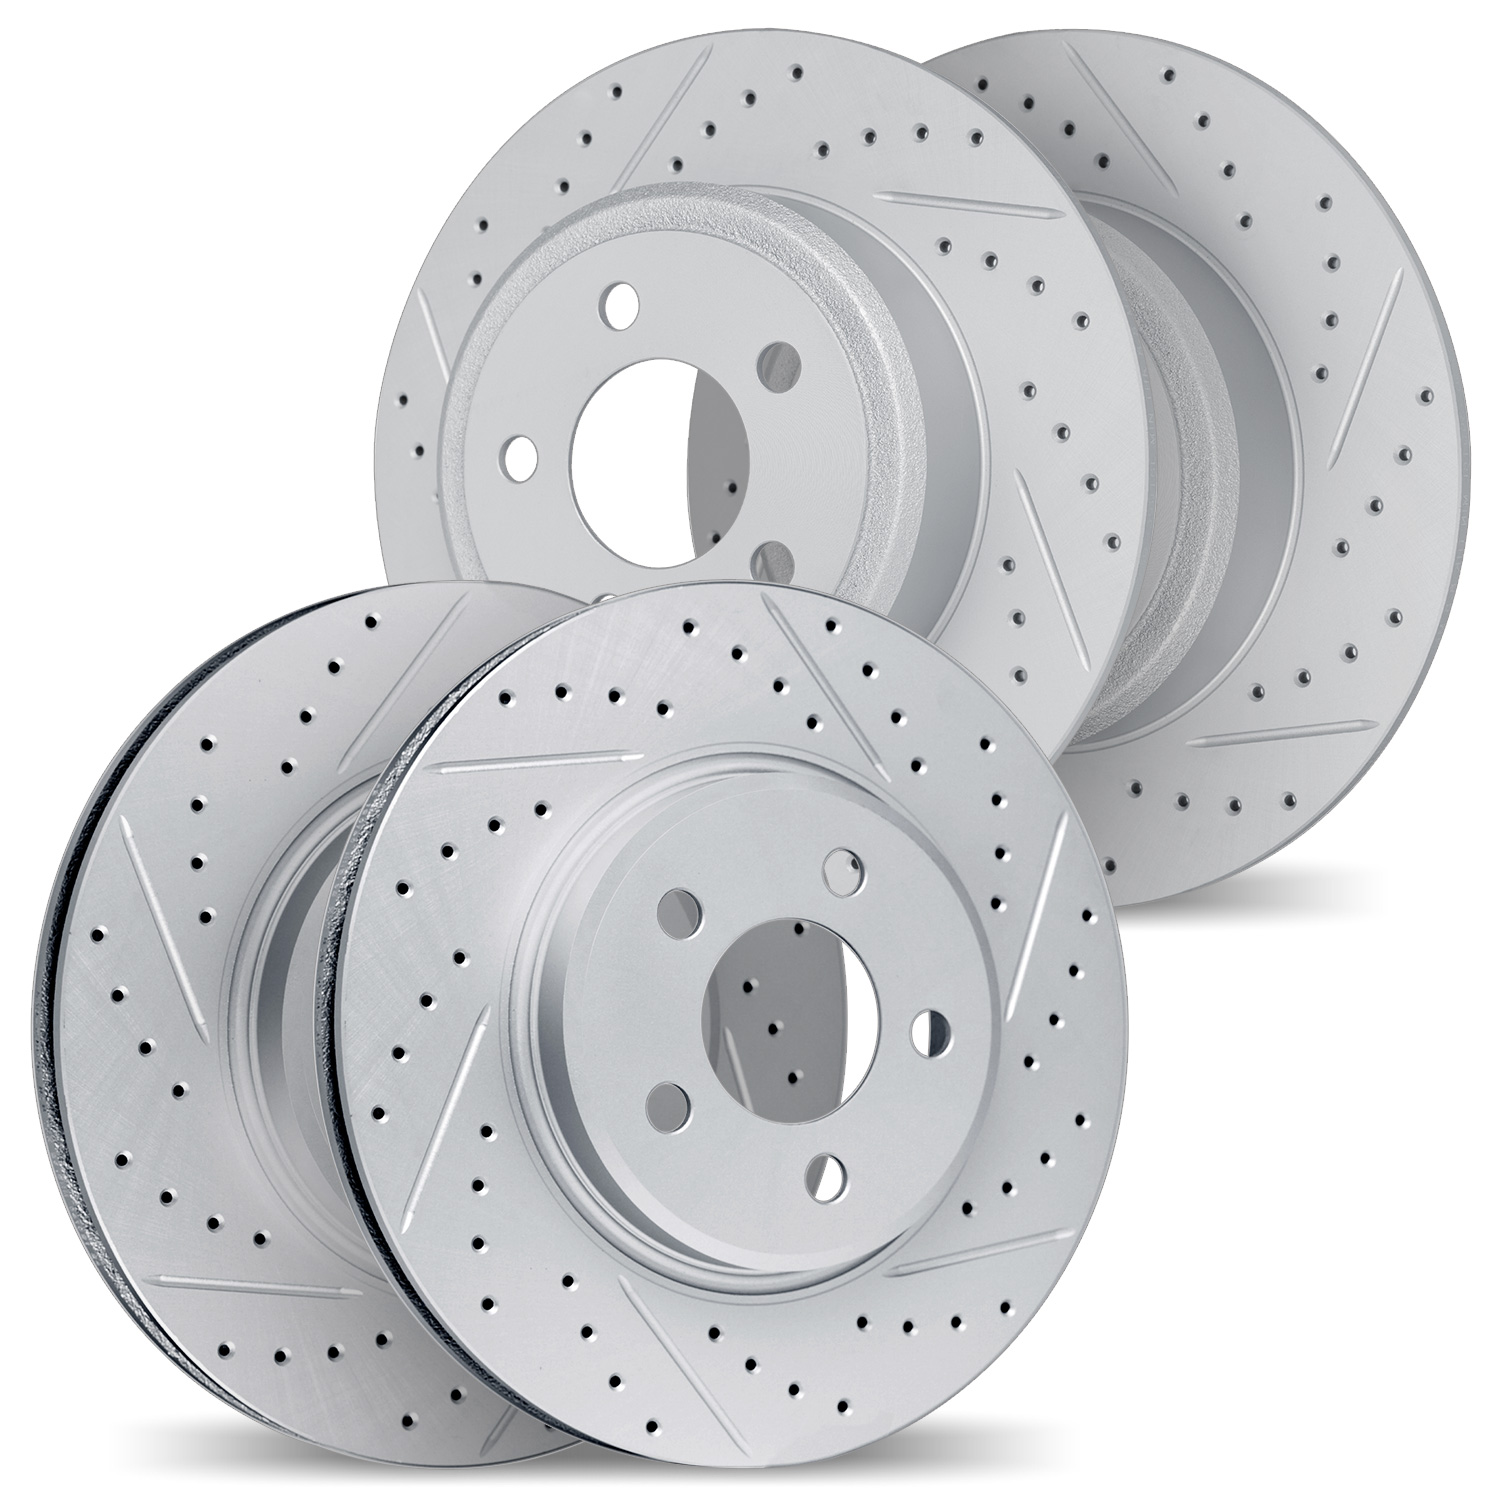 2004-31052 Geoperformance Drilled/Slotted Brake Rotors, 2014-2021 BMW, Position: Front and Rear